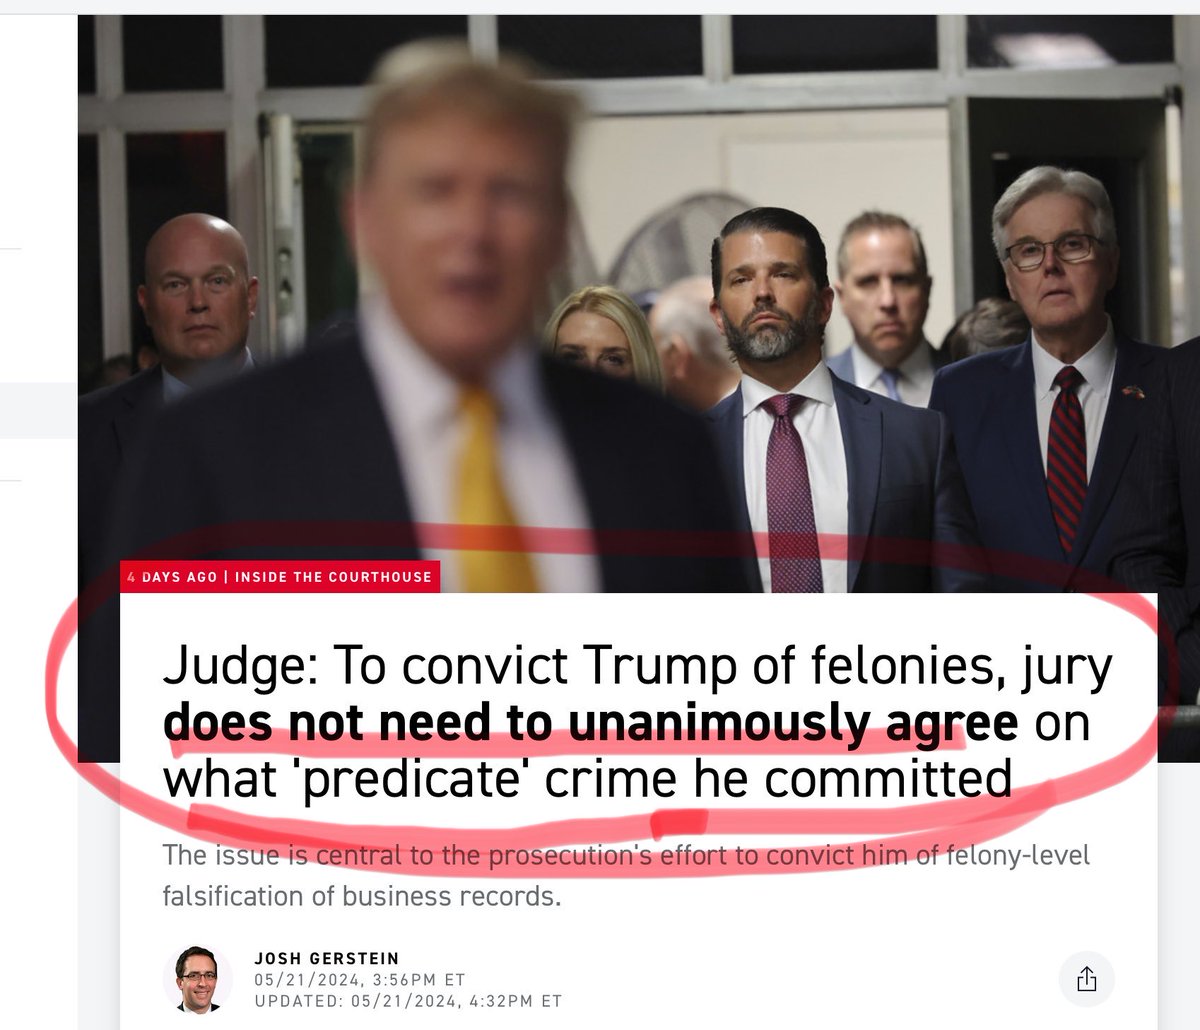 This is what I was referring to yesterday with @megynkelly on @MegynKellyShow We’ve been through the whole #TrumpTrial now and not even the judge knows what “other crime” the defense is supposed to defense against This is a farce, a kangaroo court Merchan is reprehensible